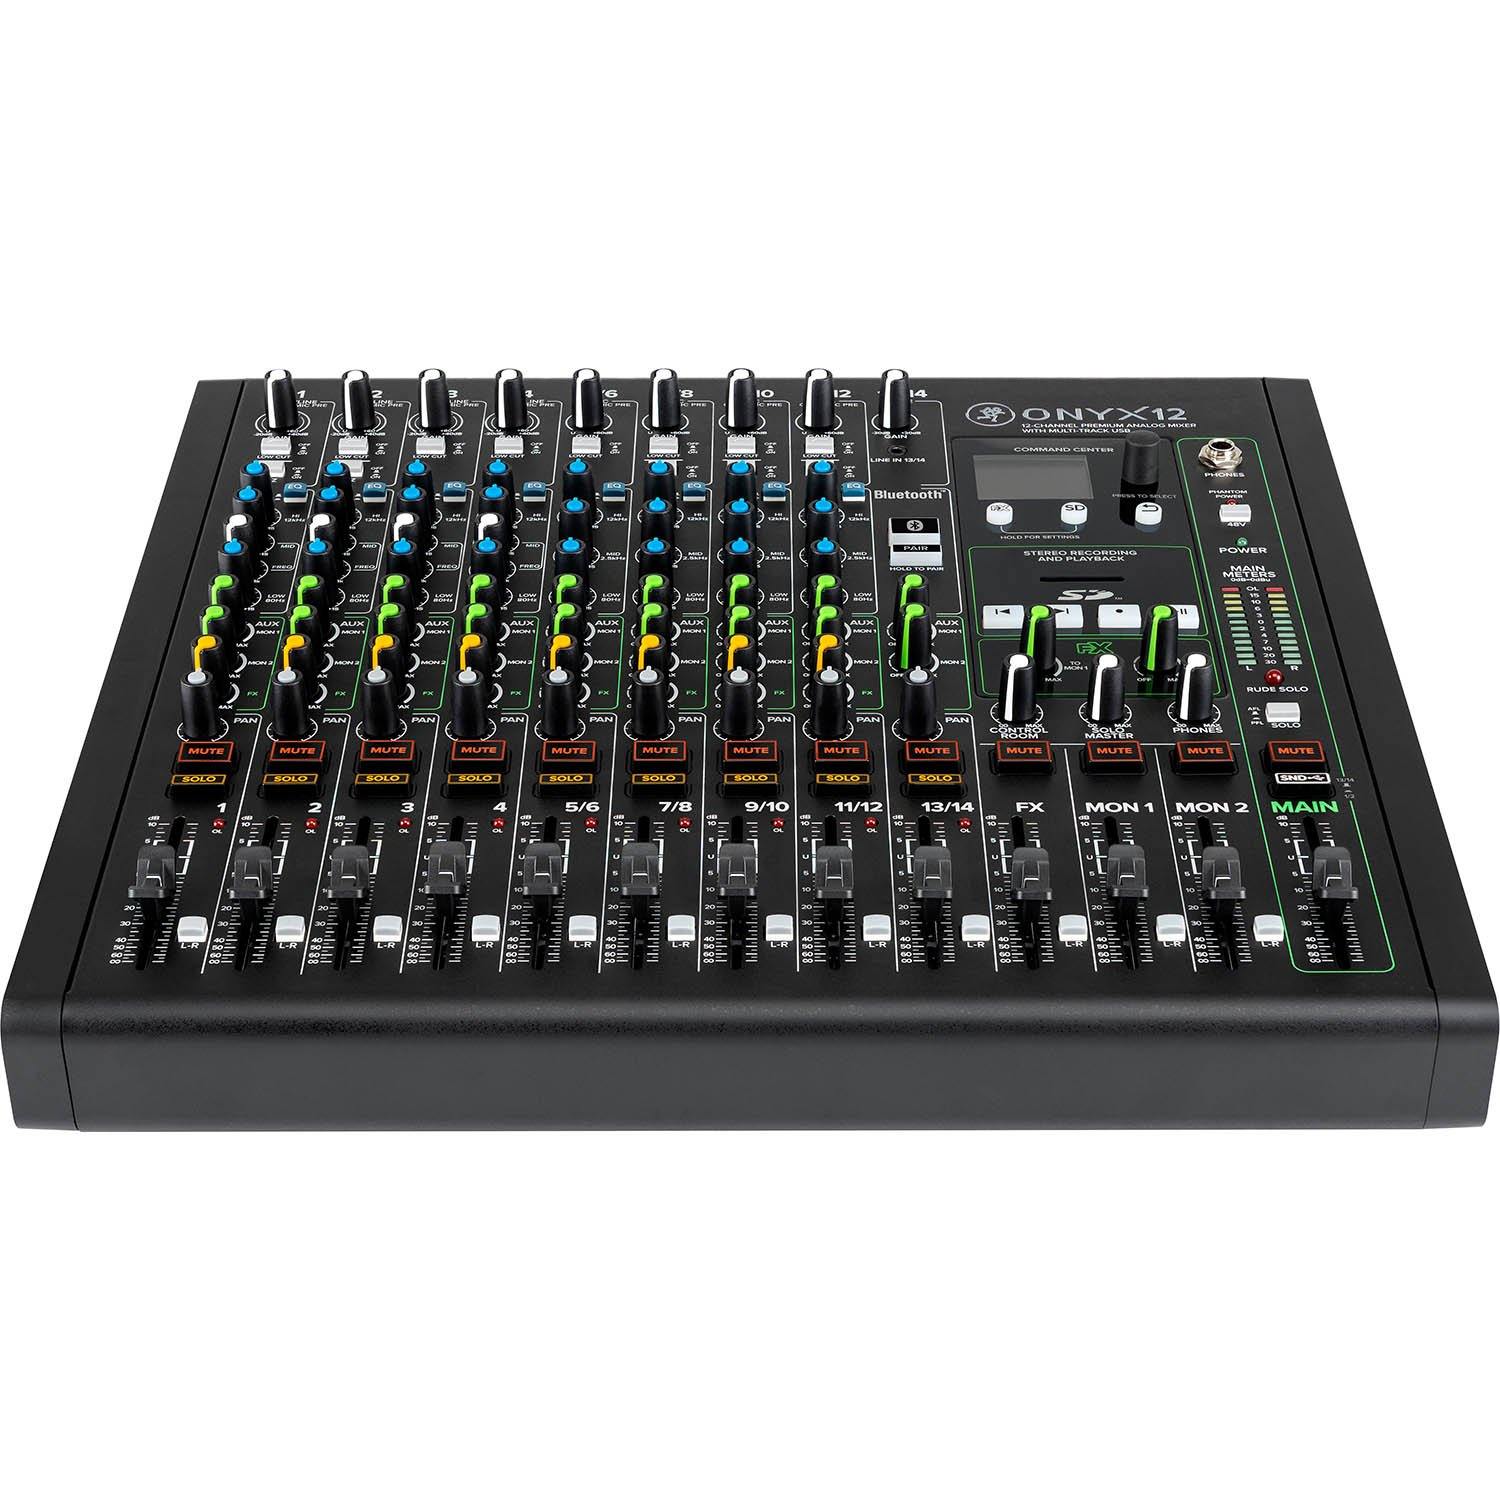 Mackie Onyx12 12 Channel Mixer with Multi-Track USB - DY Pro Audio